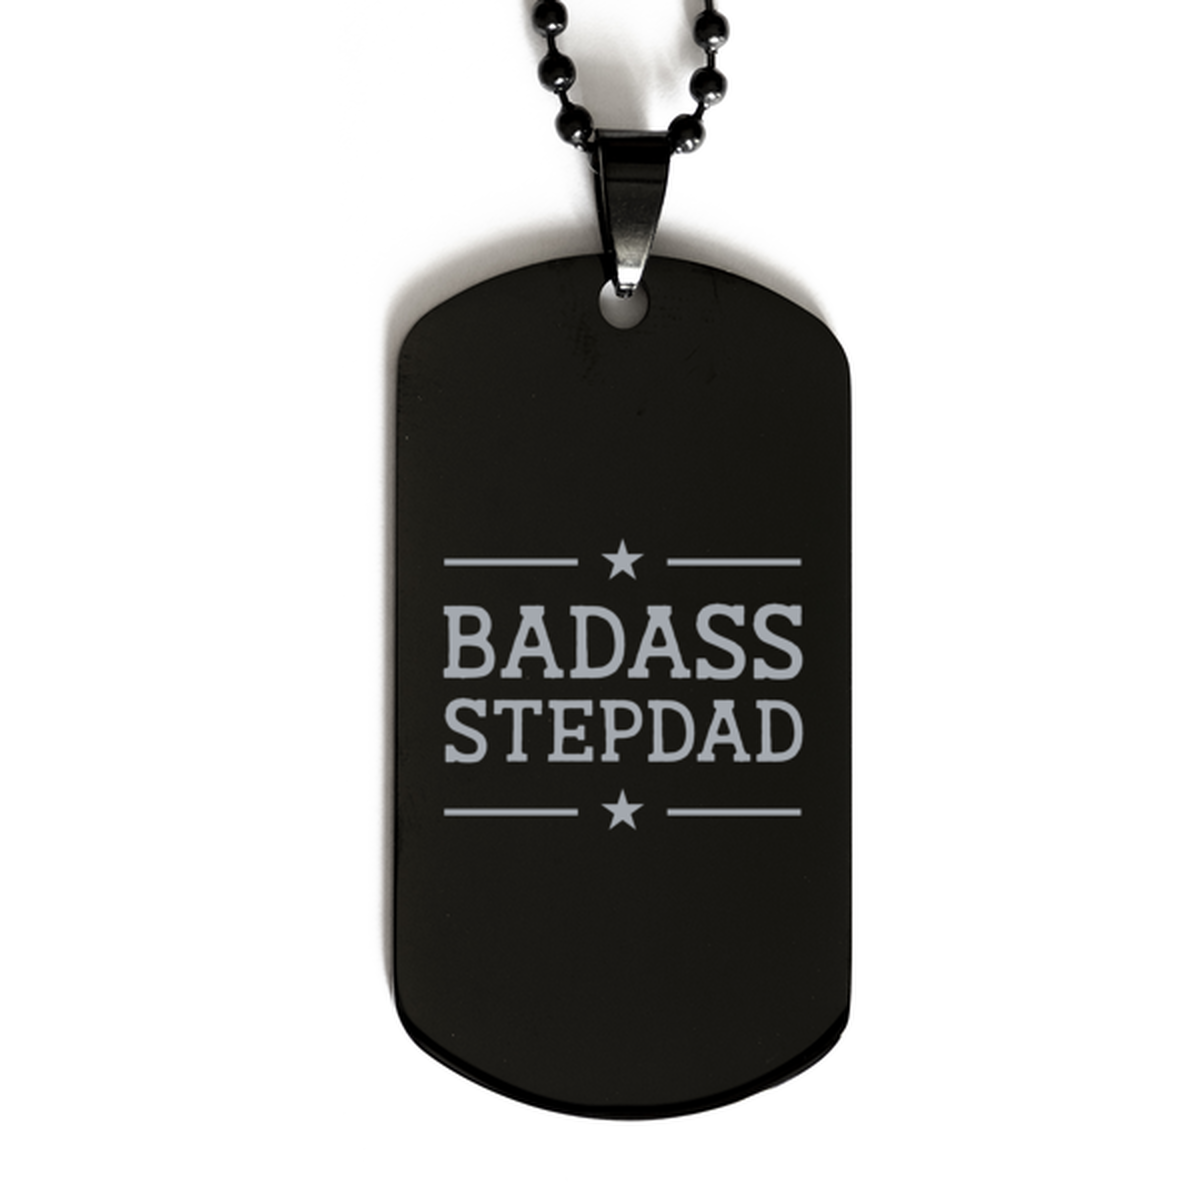 Stepdad Black Dog Tag, Badass Stepdad, Funny Family Gifts  Necklace For Stepdad From Son Daughter